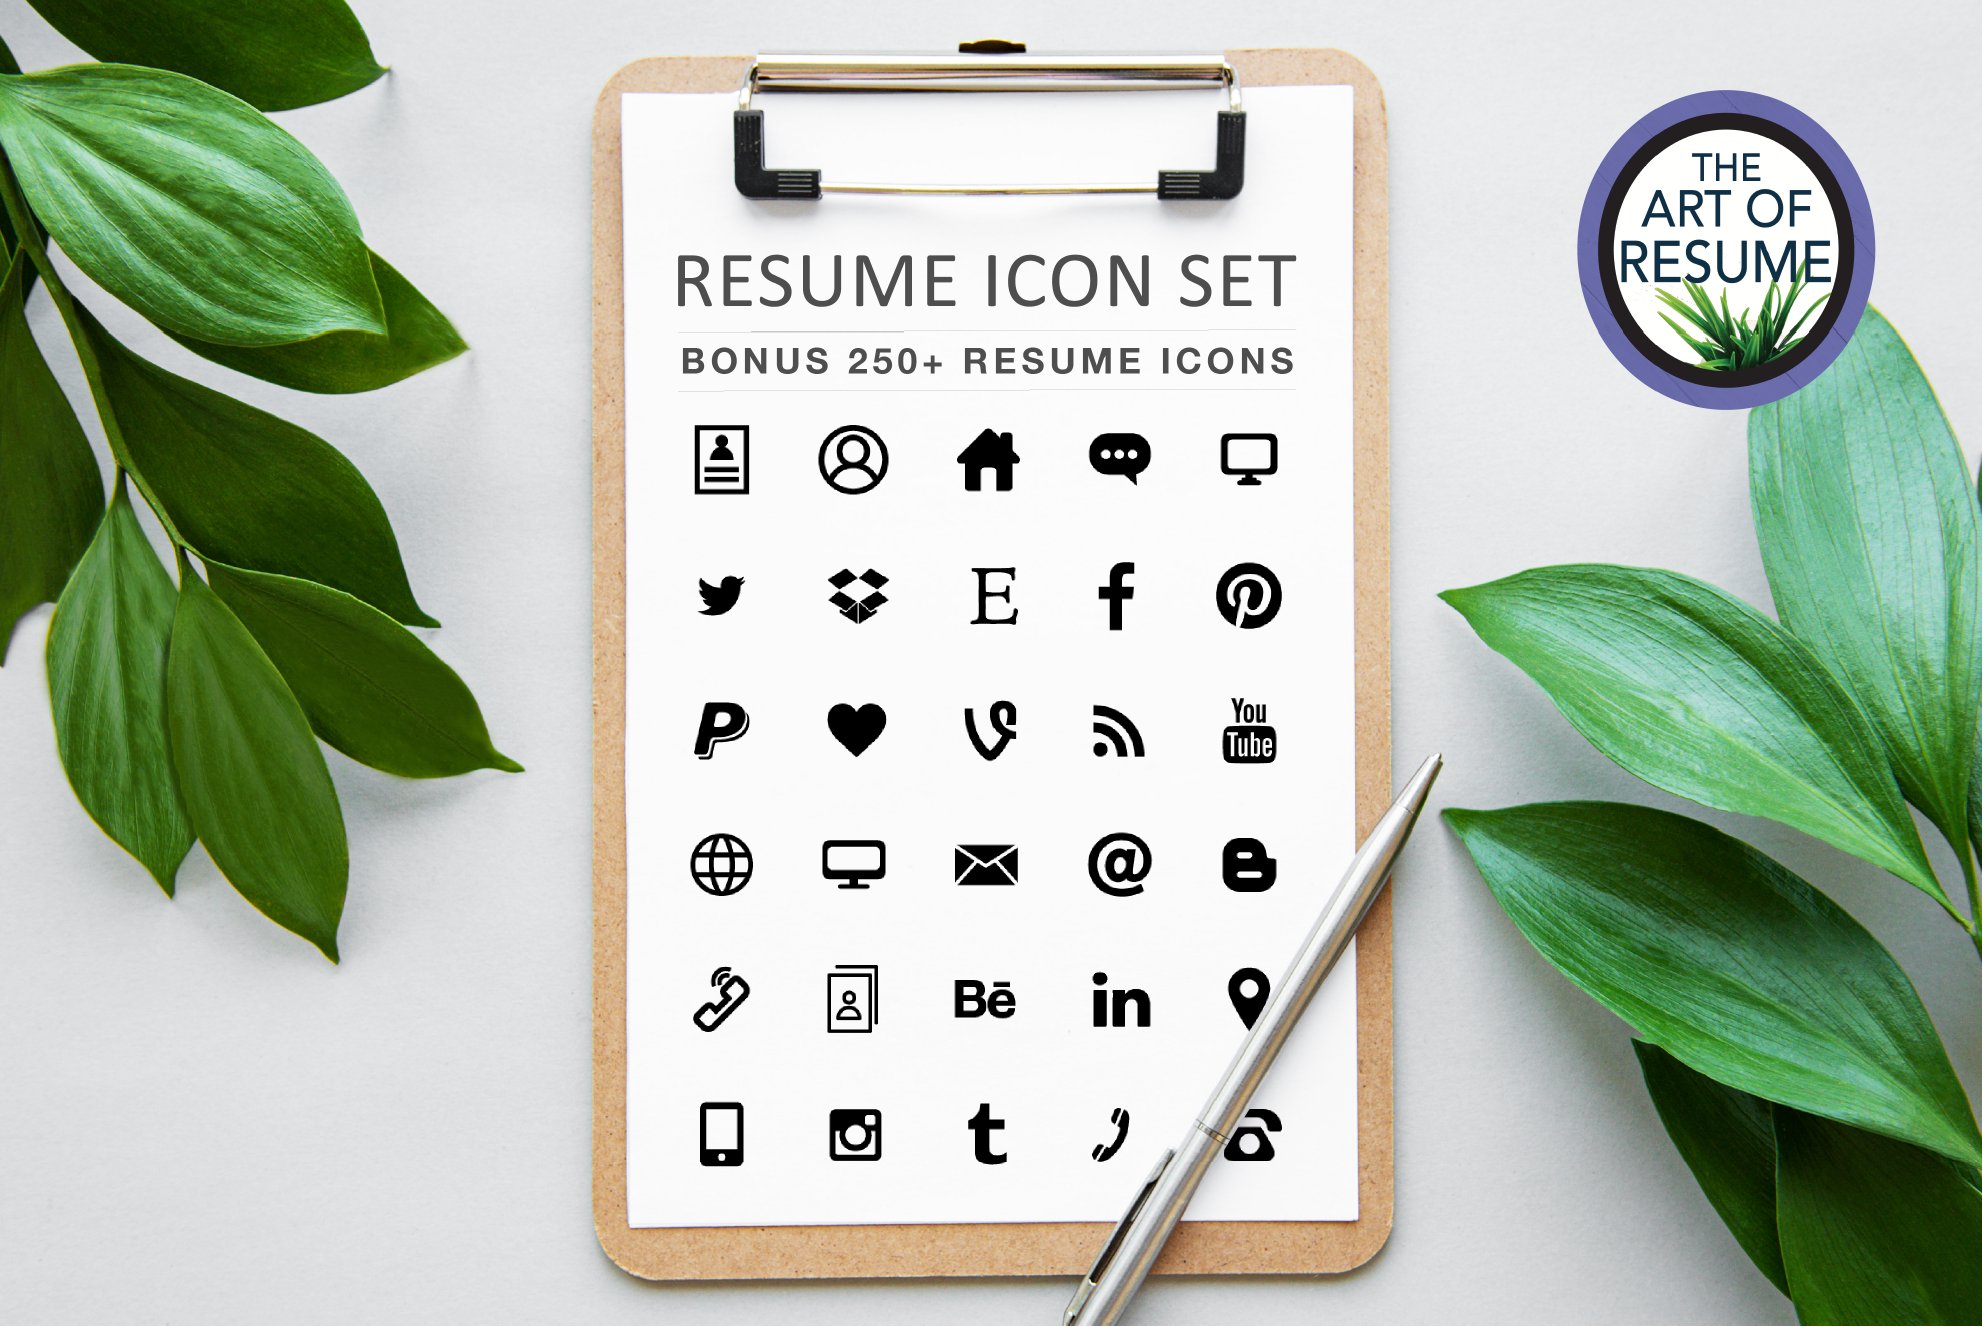 Clipboard with a list of icons on it.